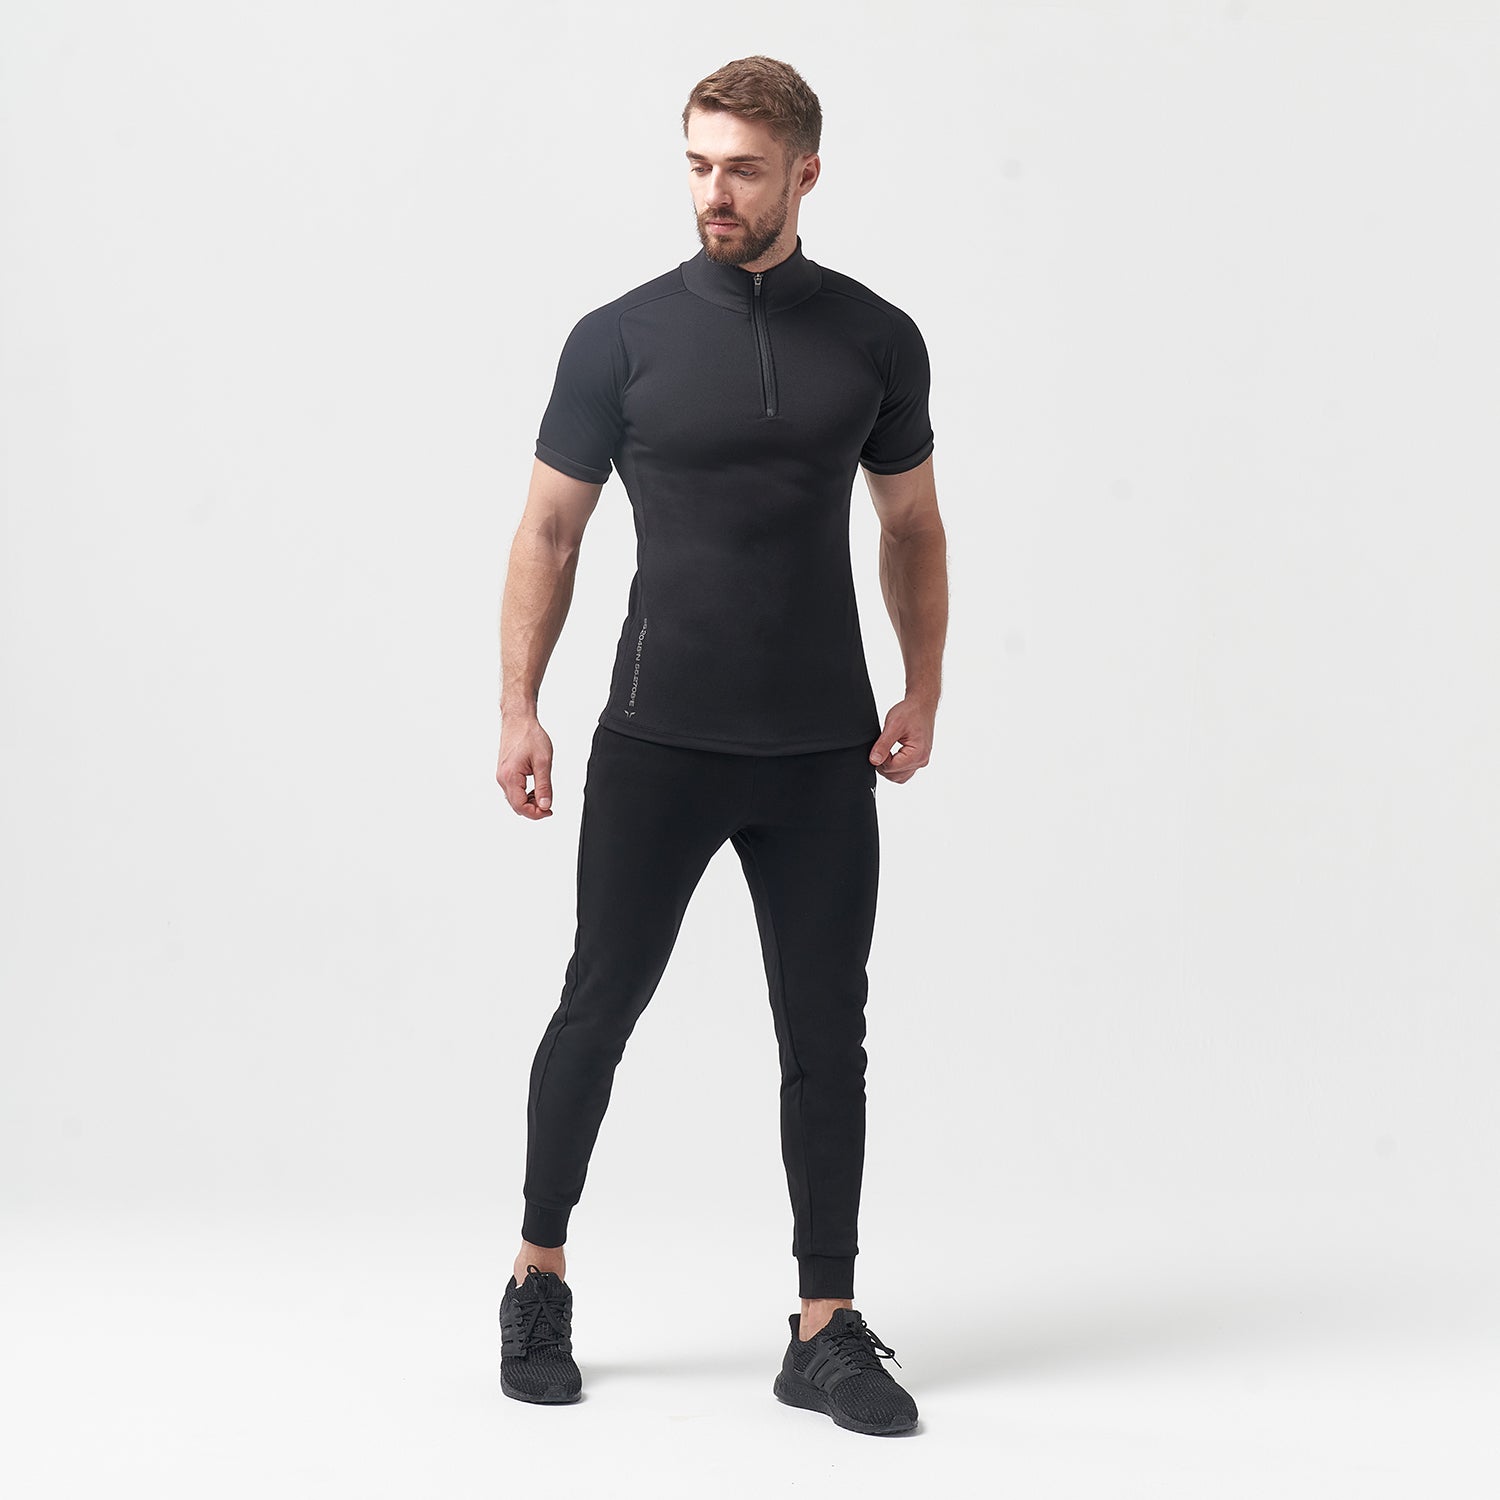 squatwolf-gym-wear-code-zip-up-tee-black-workout-shirts-for-men